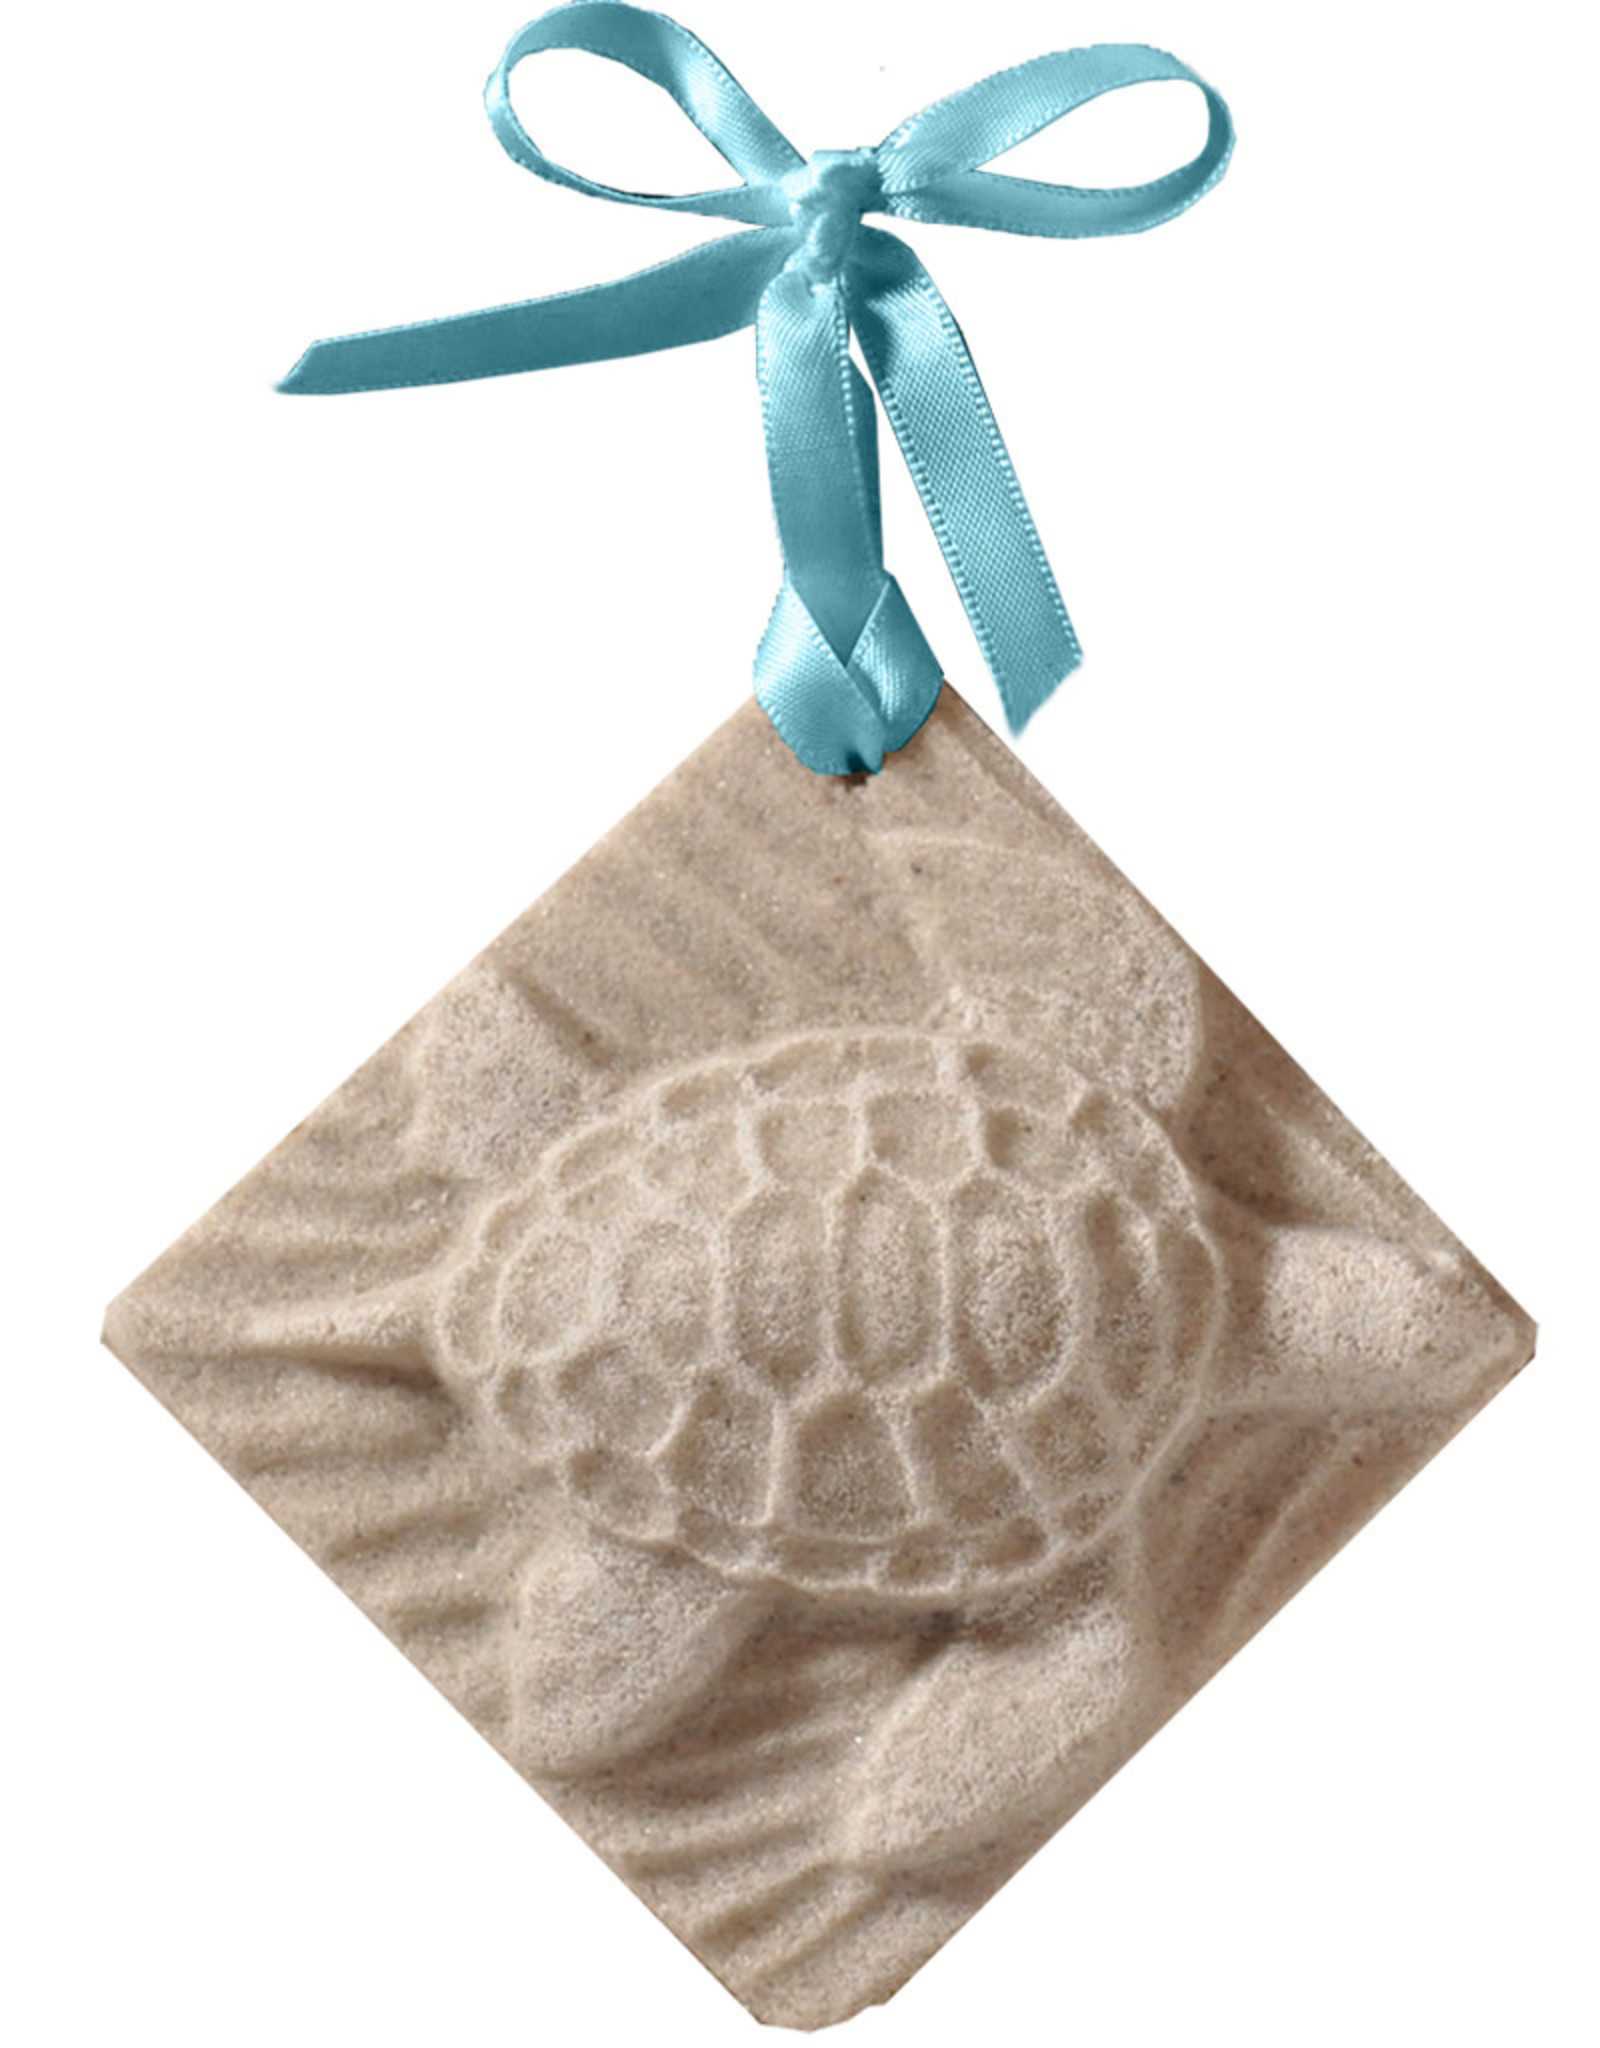 DIGS-N-GIFTS Sea Turtle Sand Christmas Ornament